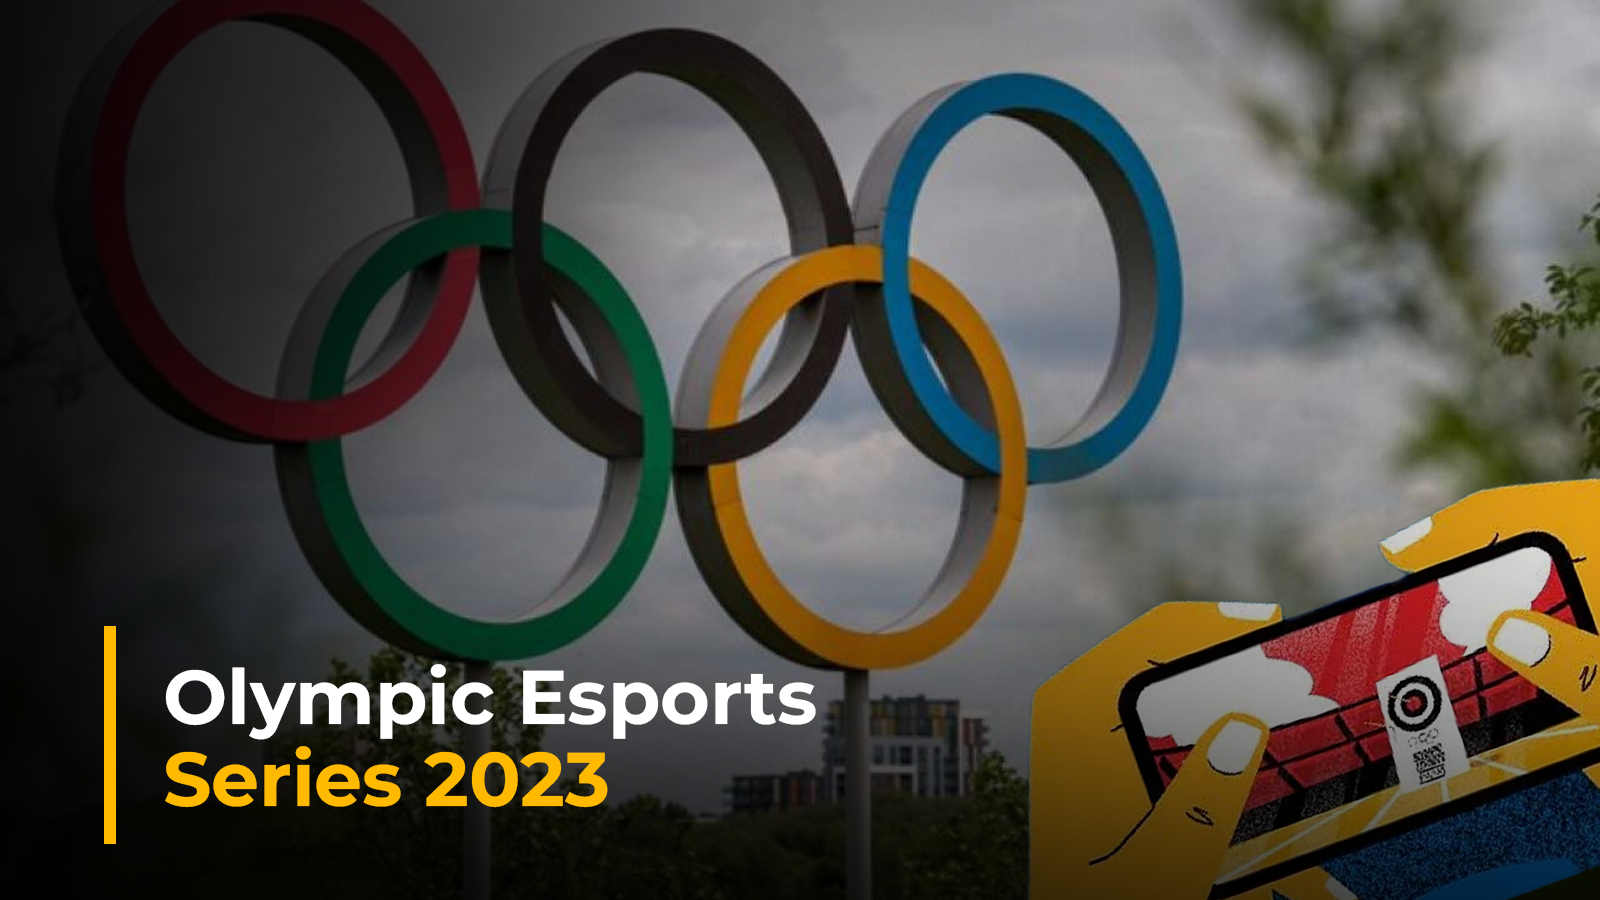 Olympic Esports Series 2023: A Revolutionary Confluence of Sports and Gaming